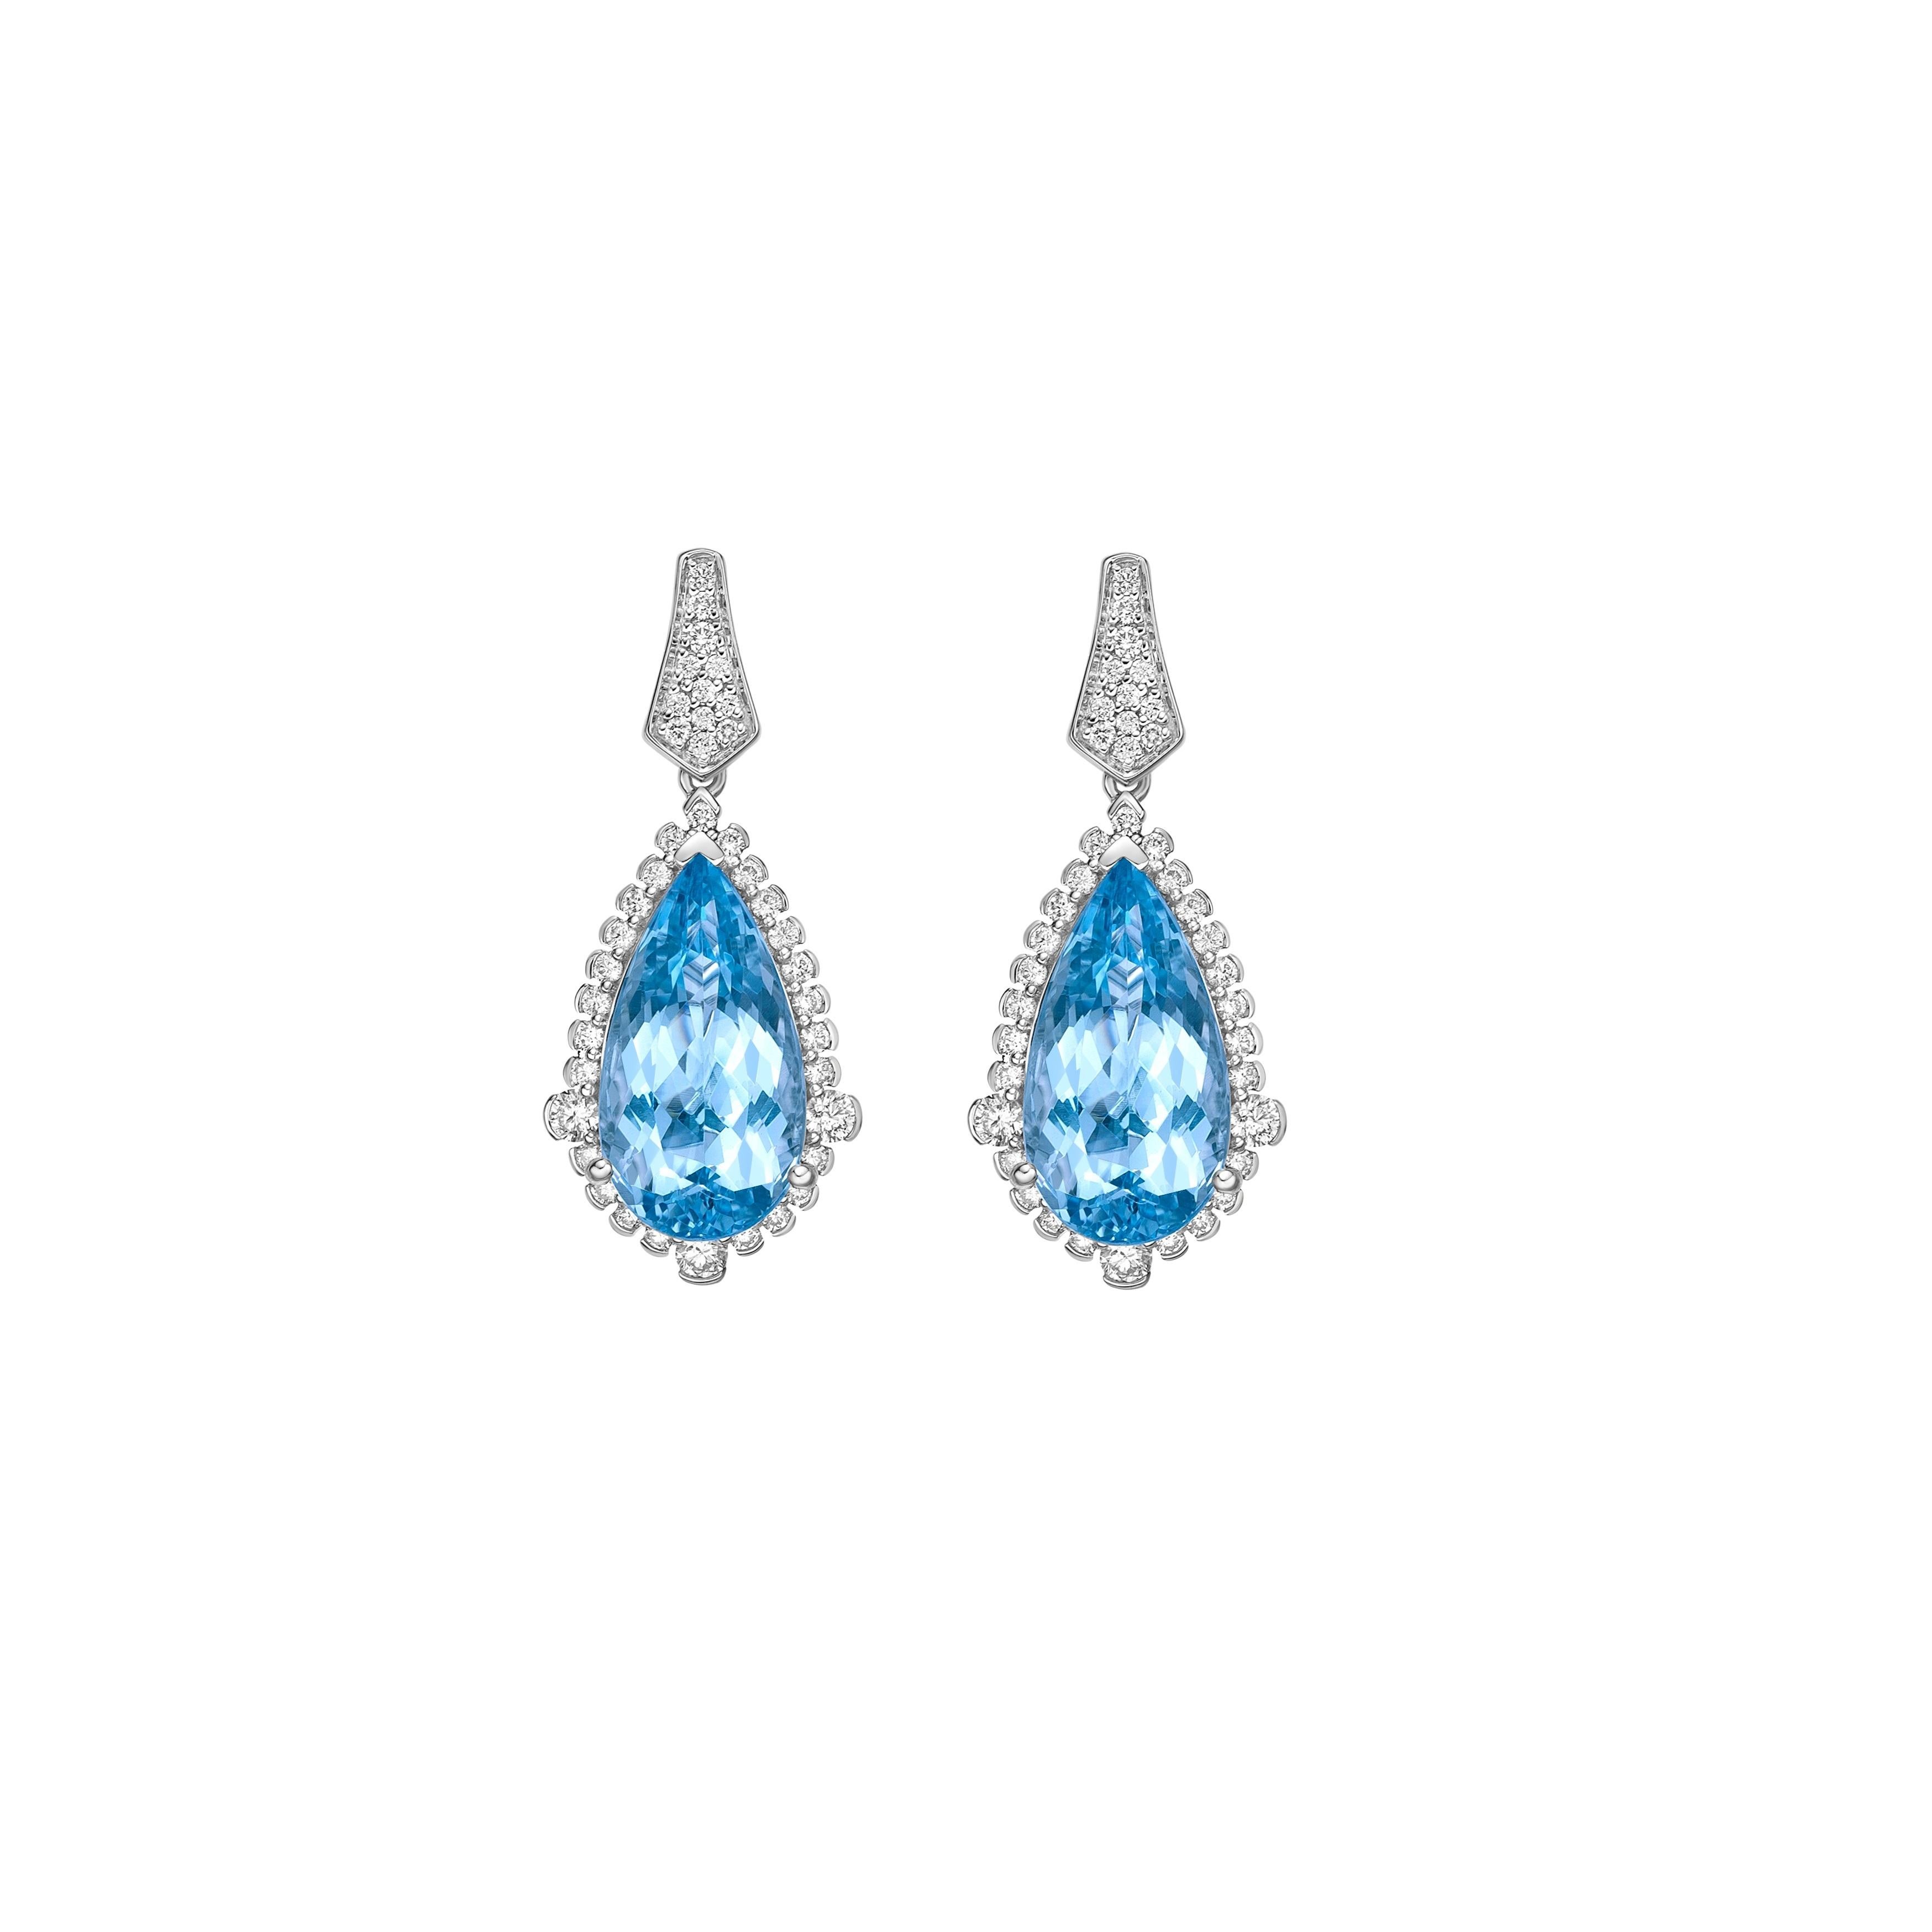 Contemporary 7.29 Carat Aquamarine Drop Earrings in 18Karat White Gold with White Diamond. For Sale